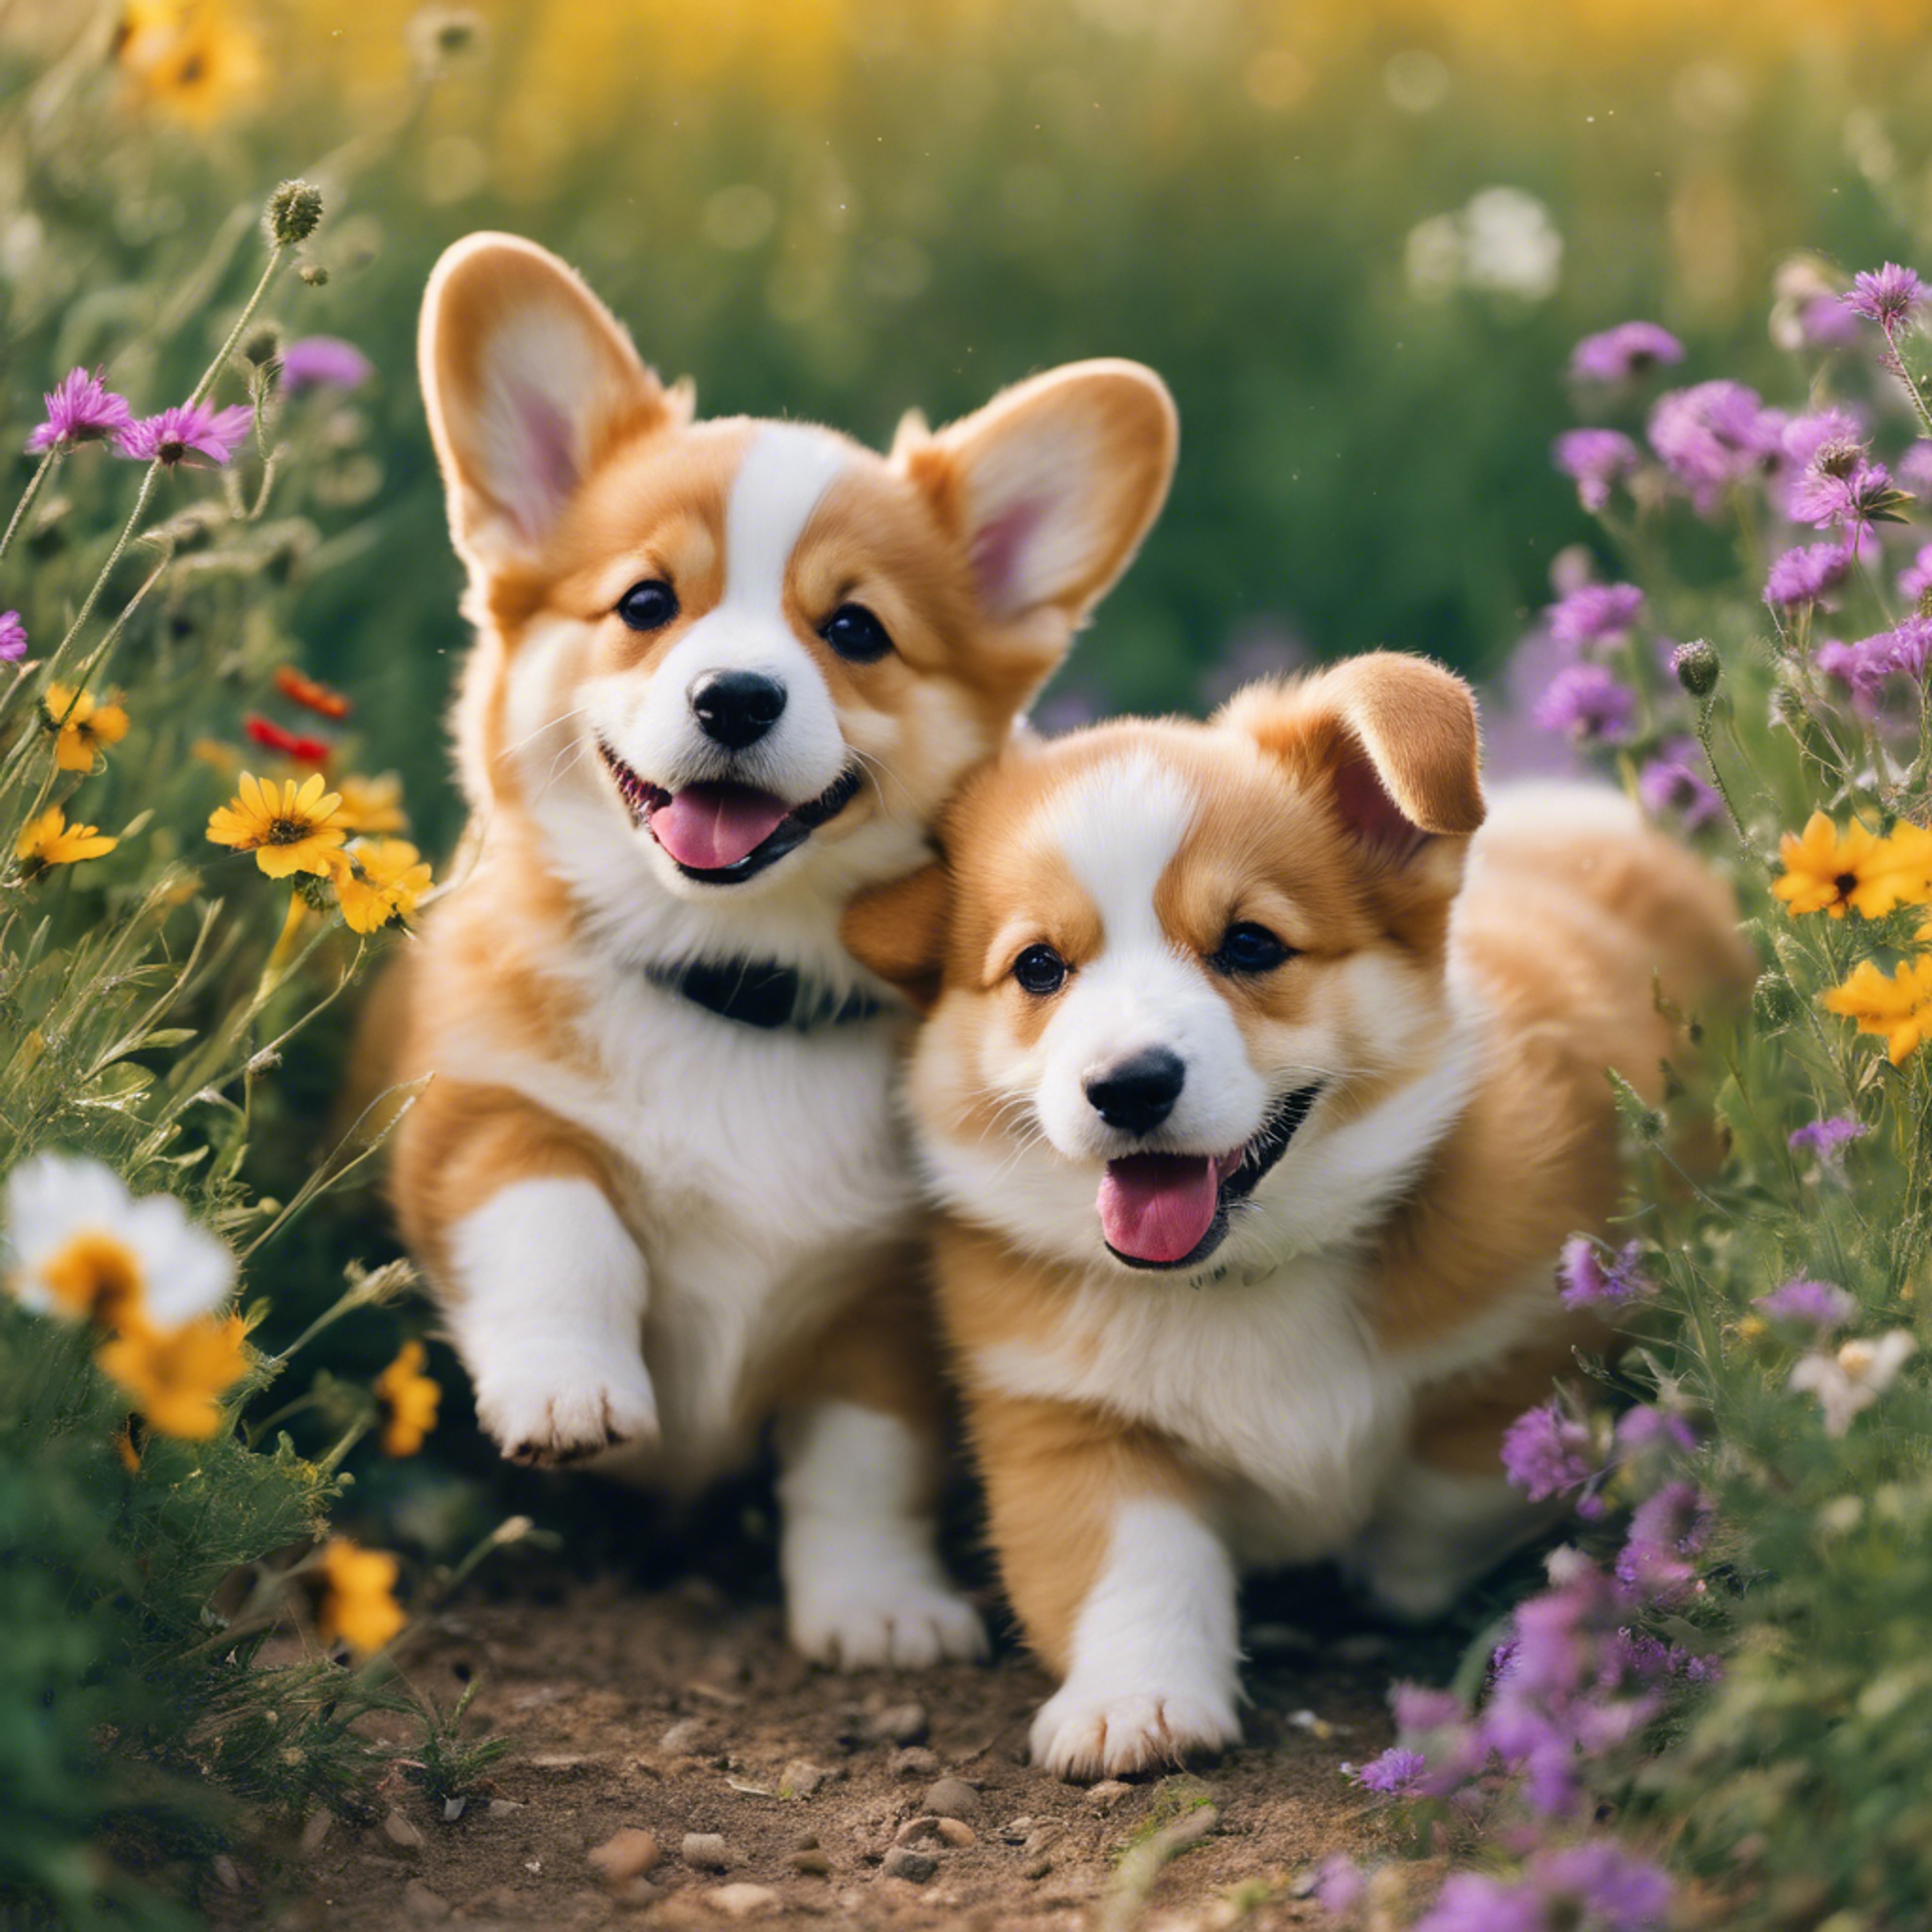 Corgi puppies frolic in a meadow filled with colourful wildflowers. 牆紙[ff39099a16654d489ef7]